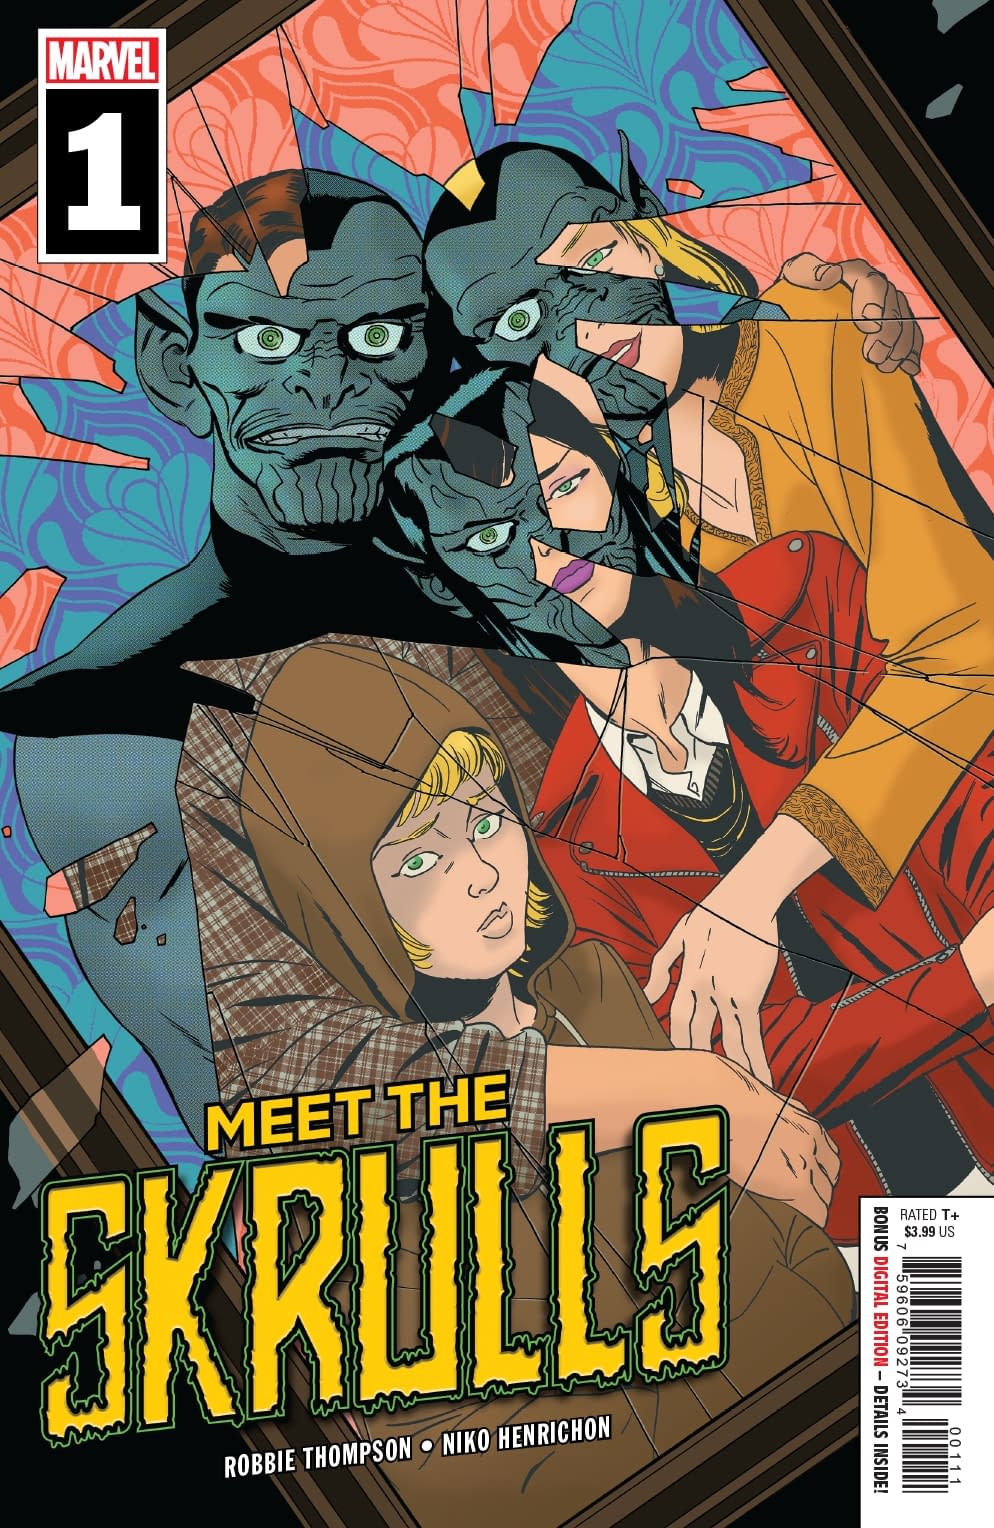 Sympathy for a Skrull in Next Week's Meet the Skrulls #1?